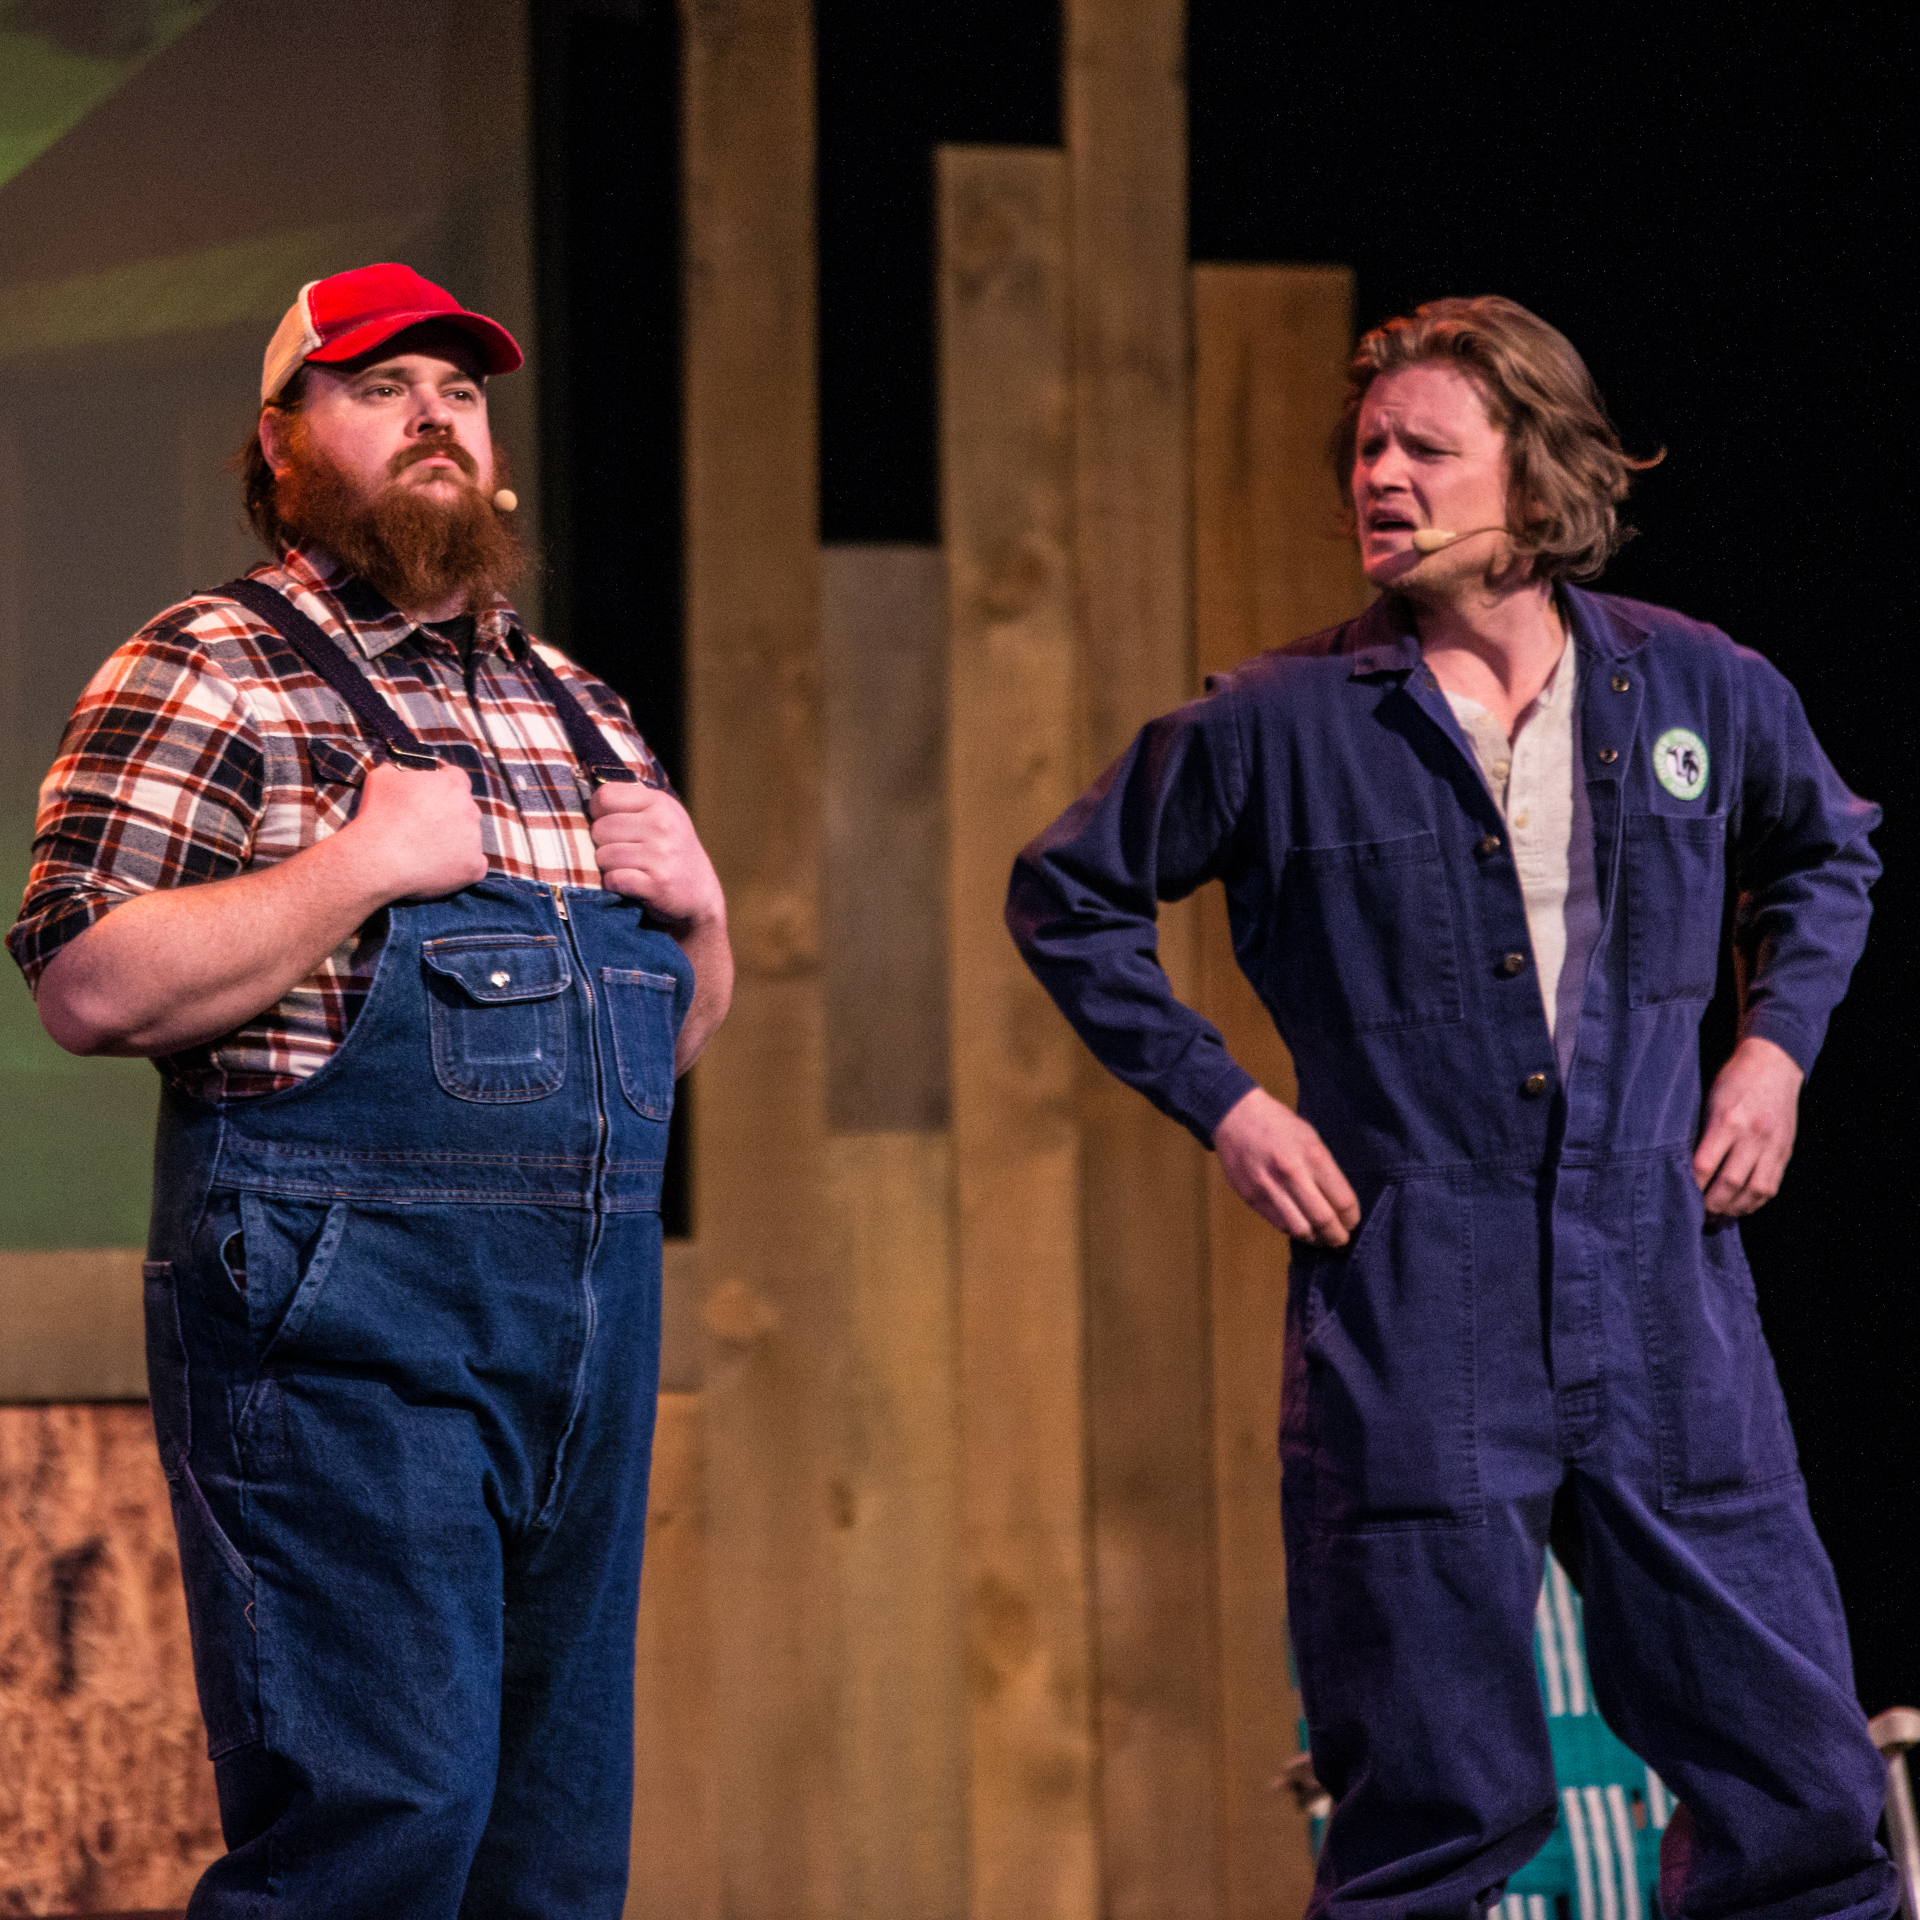 Nathan Dales and K. Trevor Wilson share a comically confused moment on stage. Nathan, hands on hips, addresses K. Trevor with a quizzical expression, while K. Trevor, holding onto the straps of his overalls, gazes off into space. Their playful interaction adds a touch of humor to the performance, creating an entertaining and engaging scene.